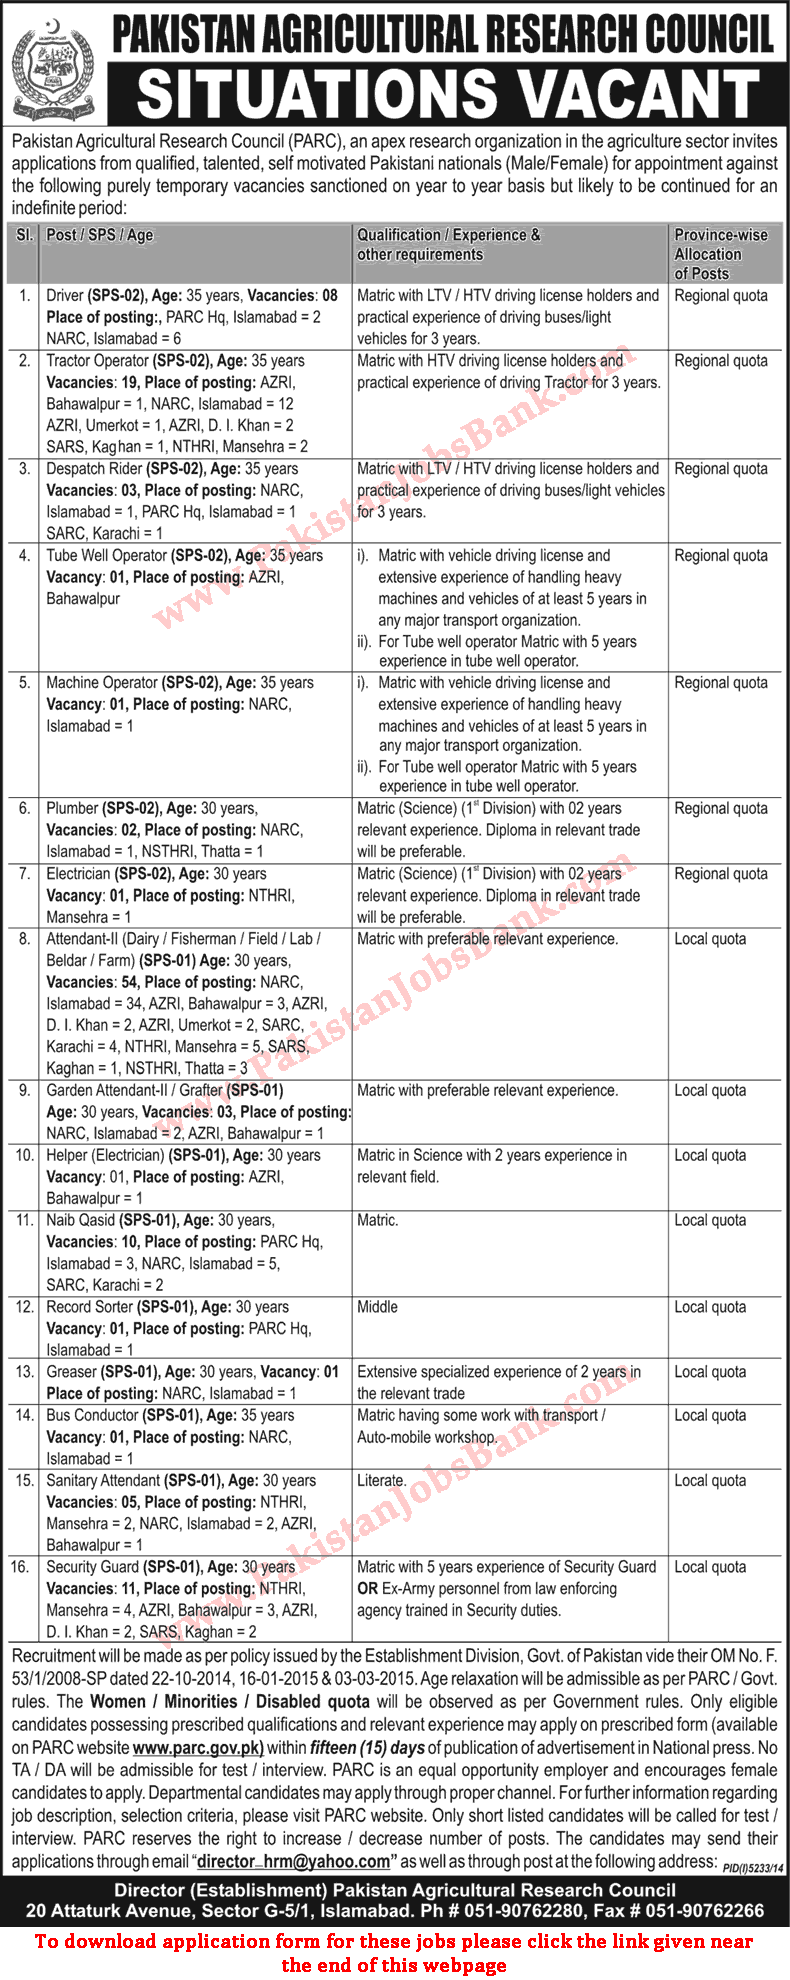 Pakistan Agriculture Research Council Jobs 2015 April Application Form Drivers, Naib Qasid, Attendants & Others